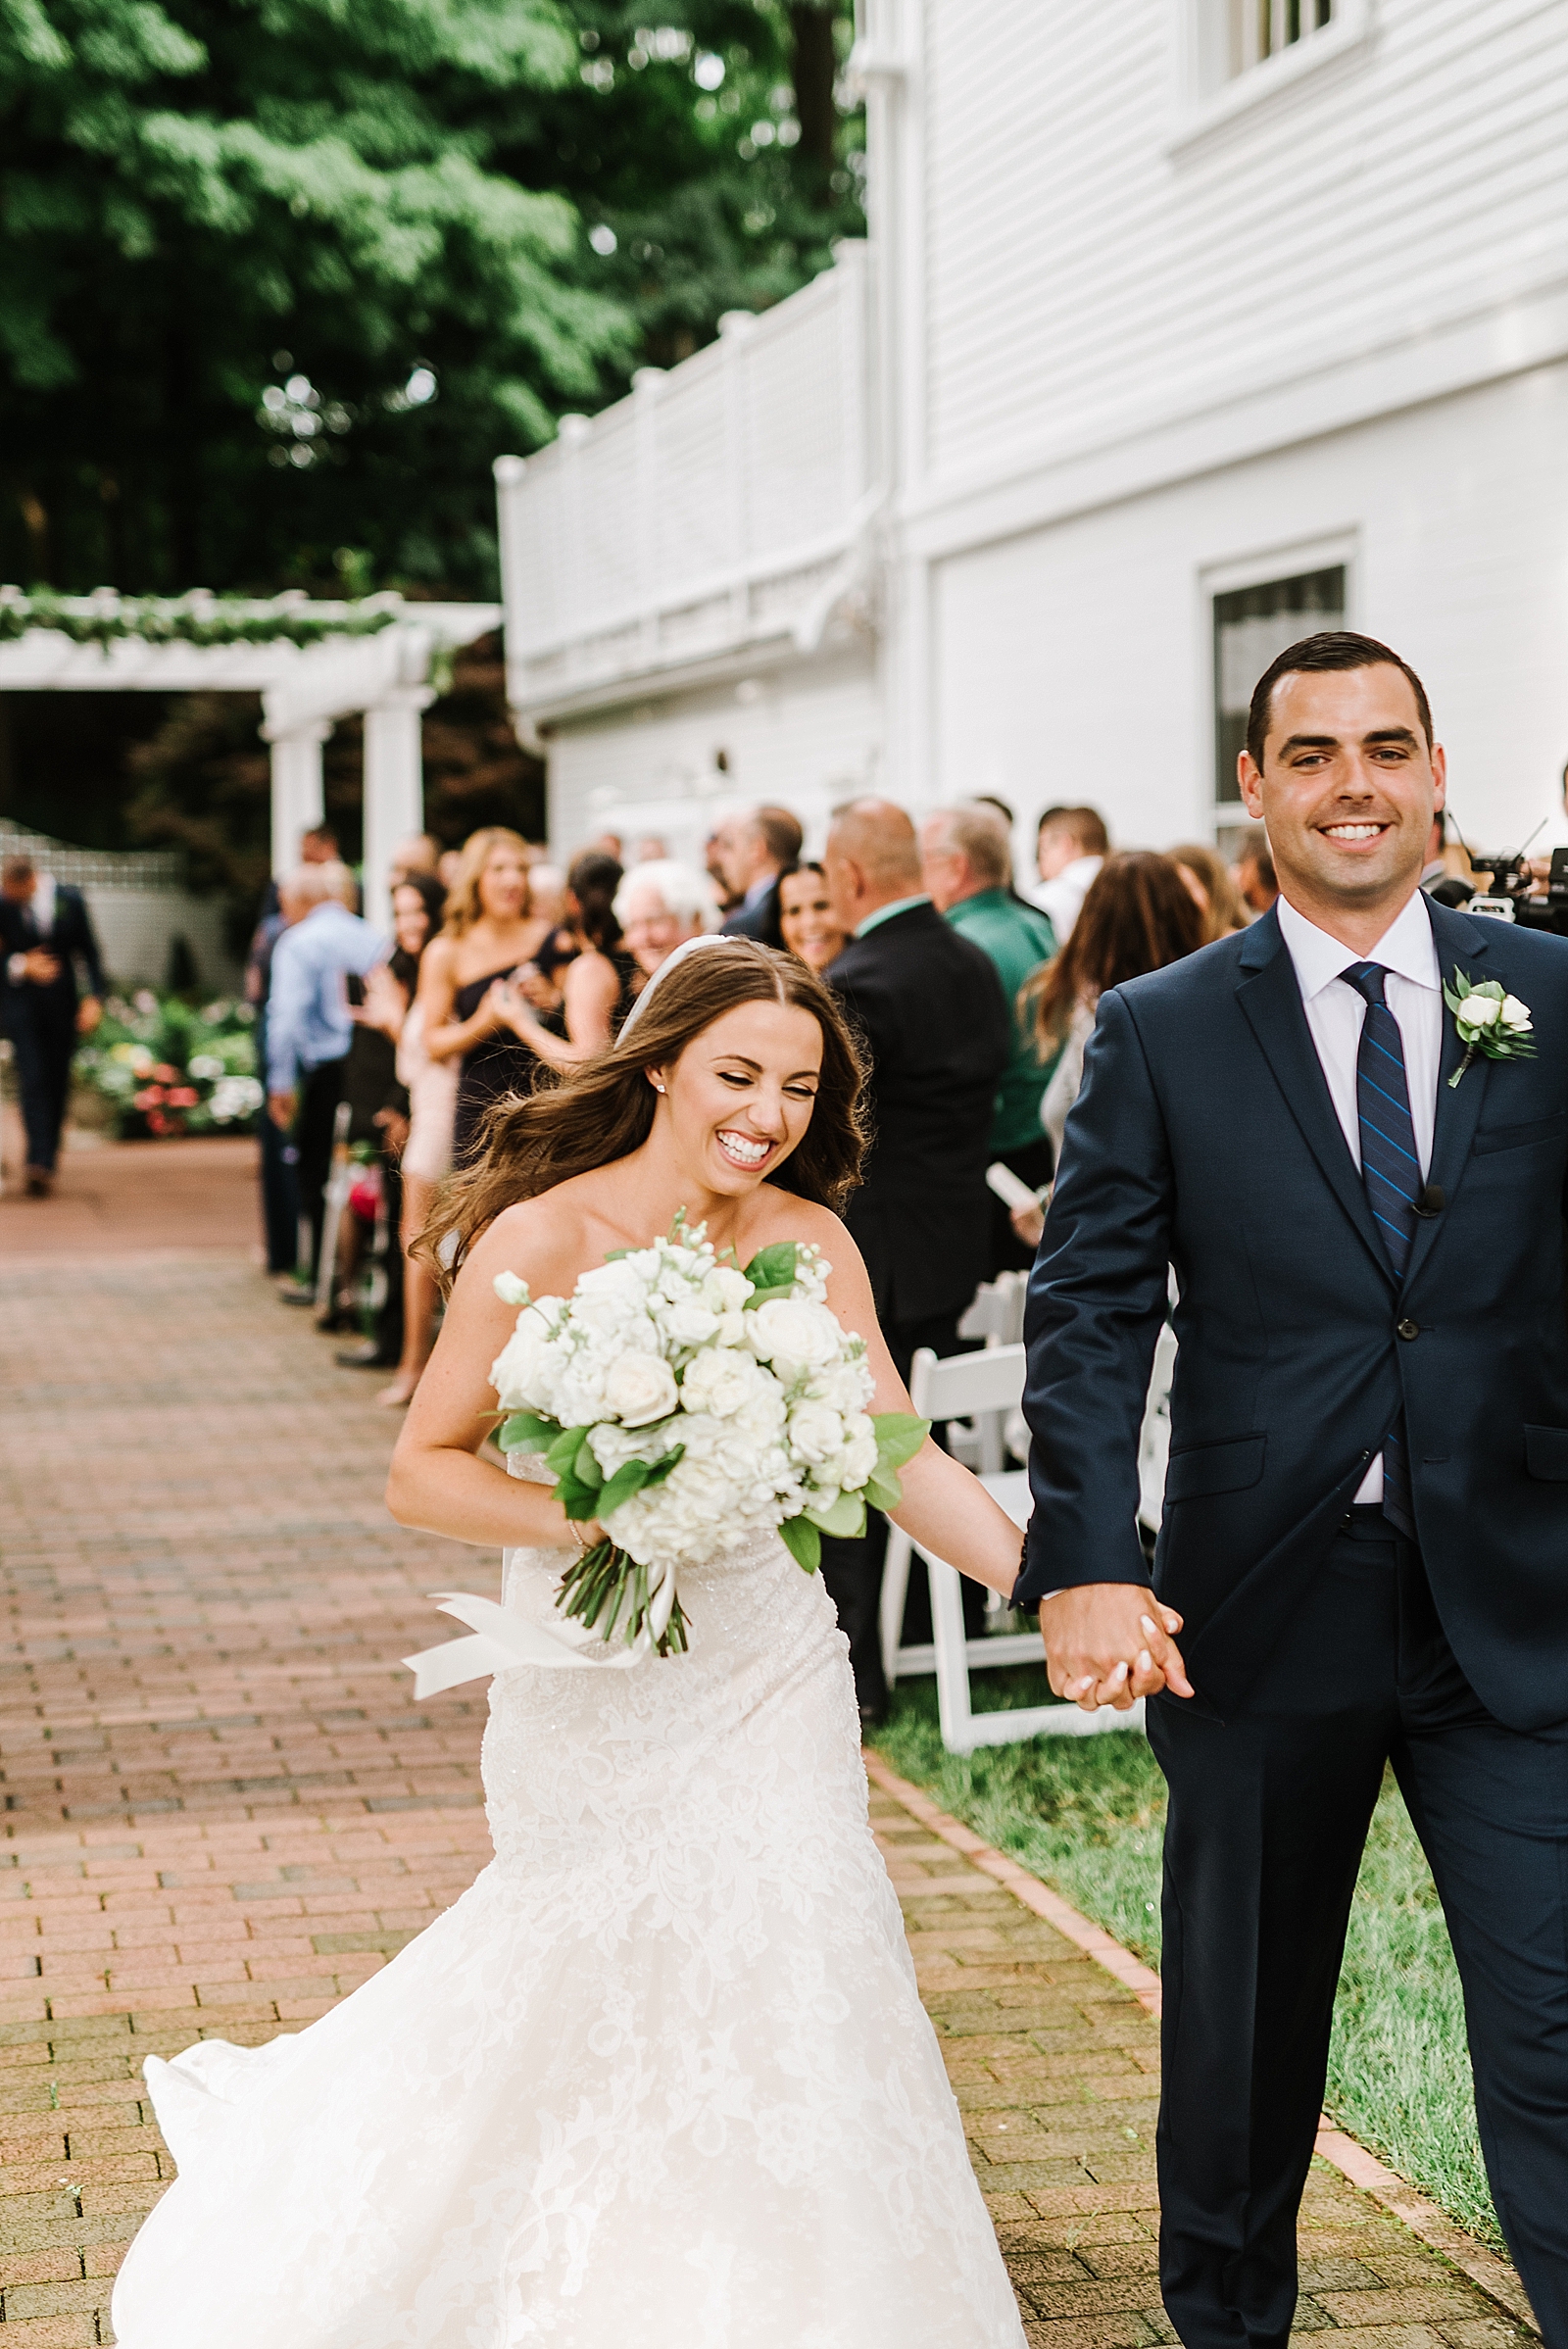 Summer Wedding at The Commons 1854 in Topsfield, MA by Boston Wedding Photographer Annmarie Swift